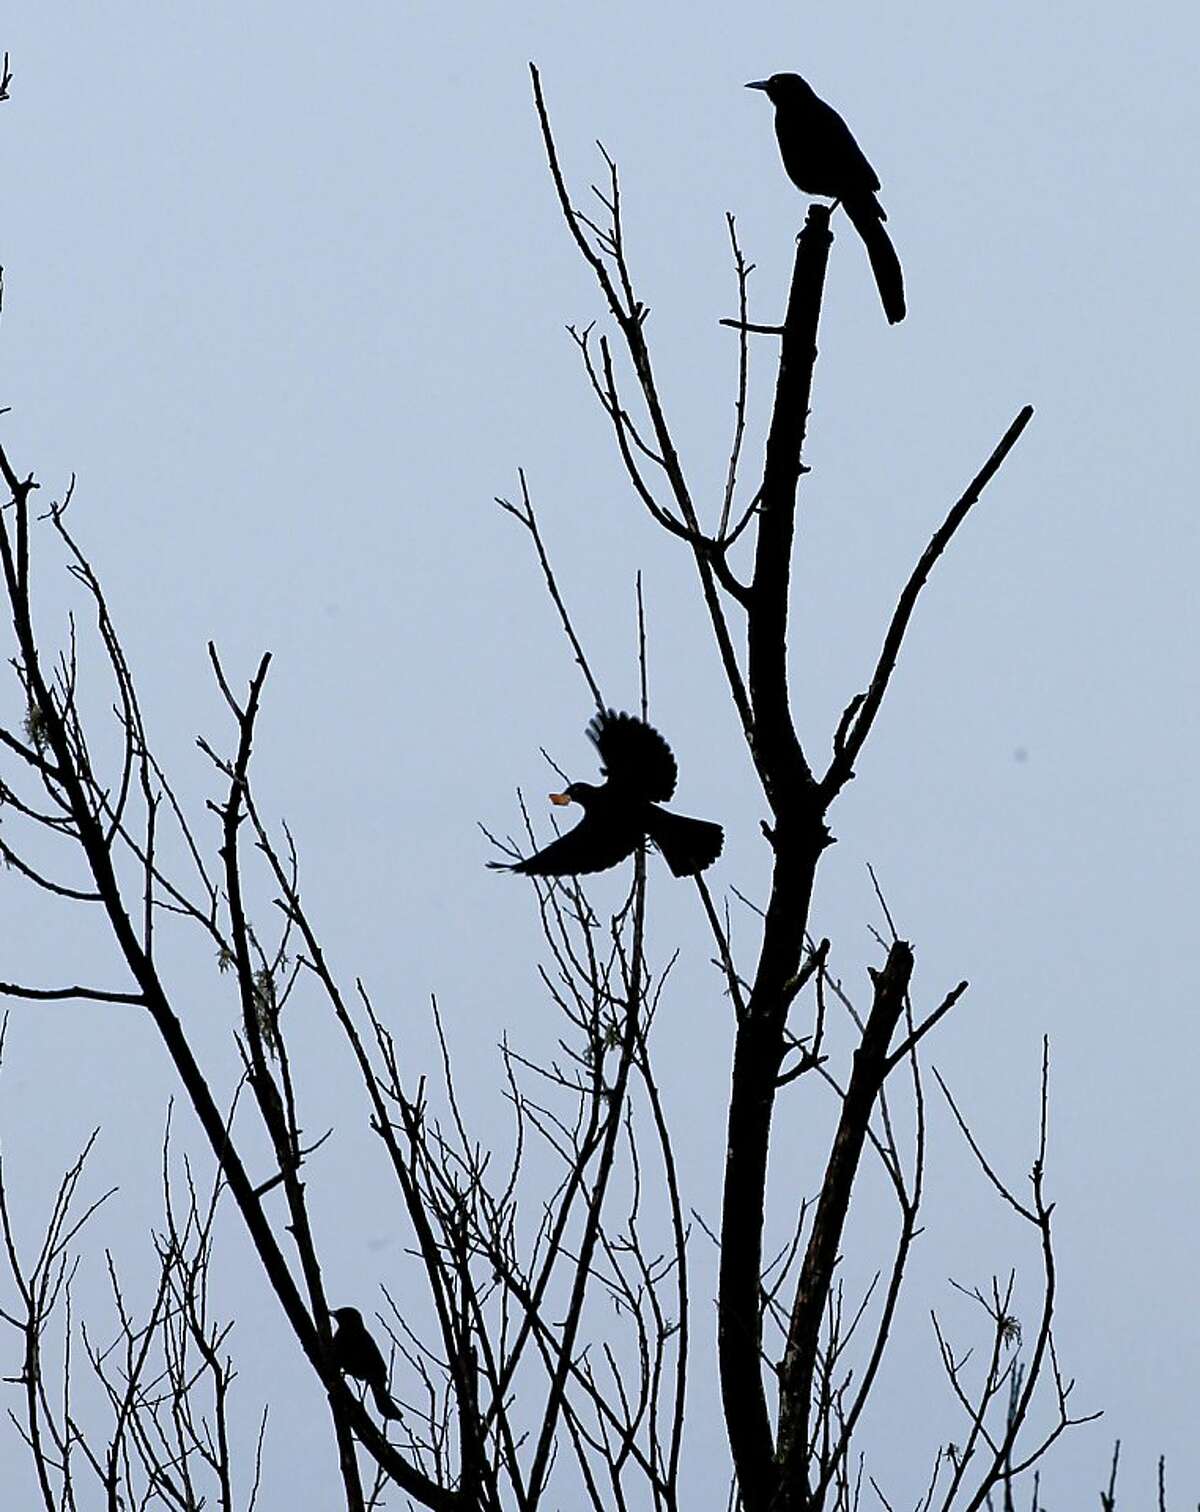 Several Great-Tailed Grackles perch in a tree at the Southern end of Lake Merced on Wednesday Nov. 21, 2012, in San Francisco, Calif. The mysterious flying aliens known as Devil Birds have been spotted in San Francisco's Lake Merced. The Great-Tailed Grackle has expanded its breeding range into the San Francisco Bay Area.